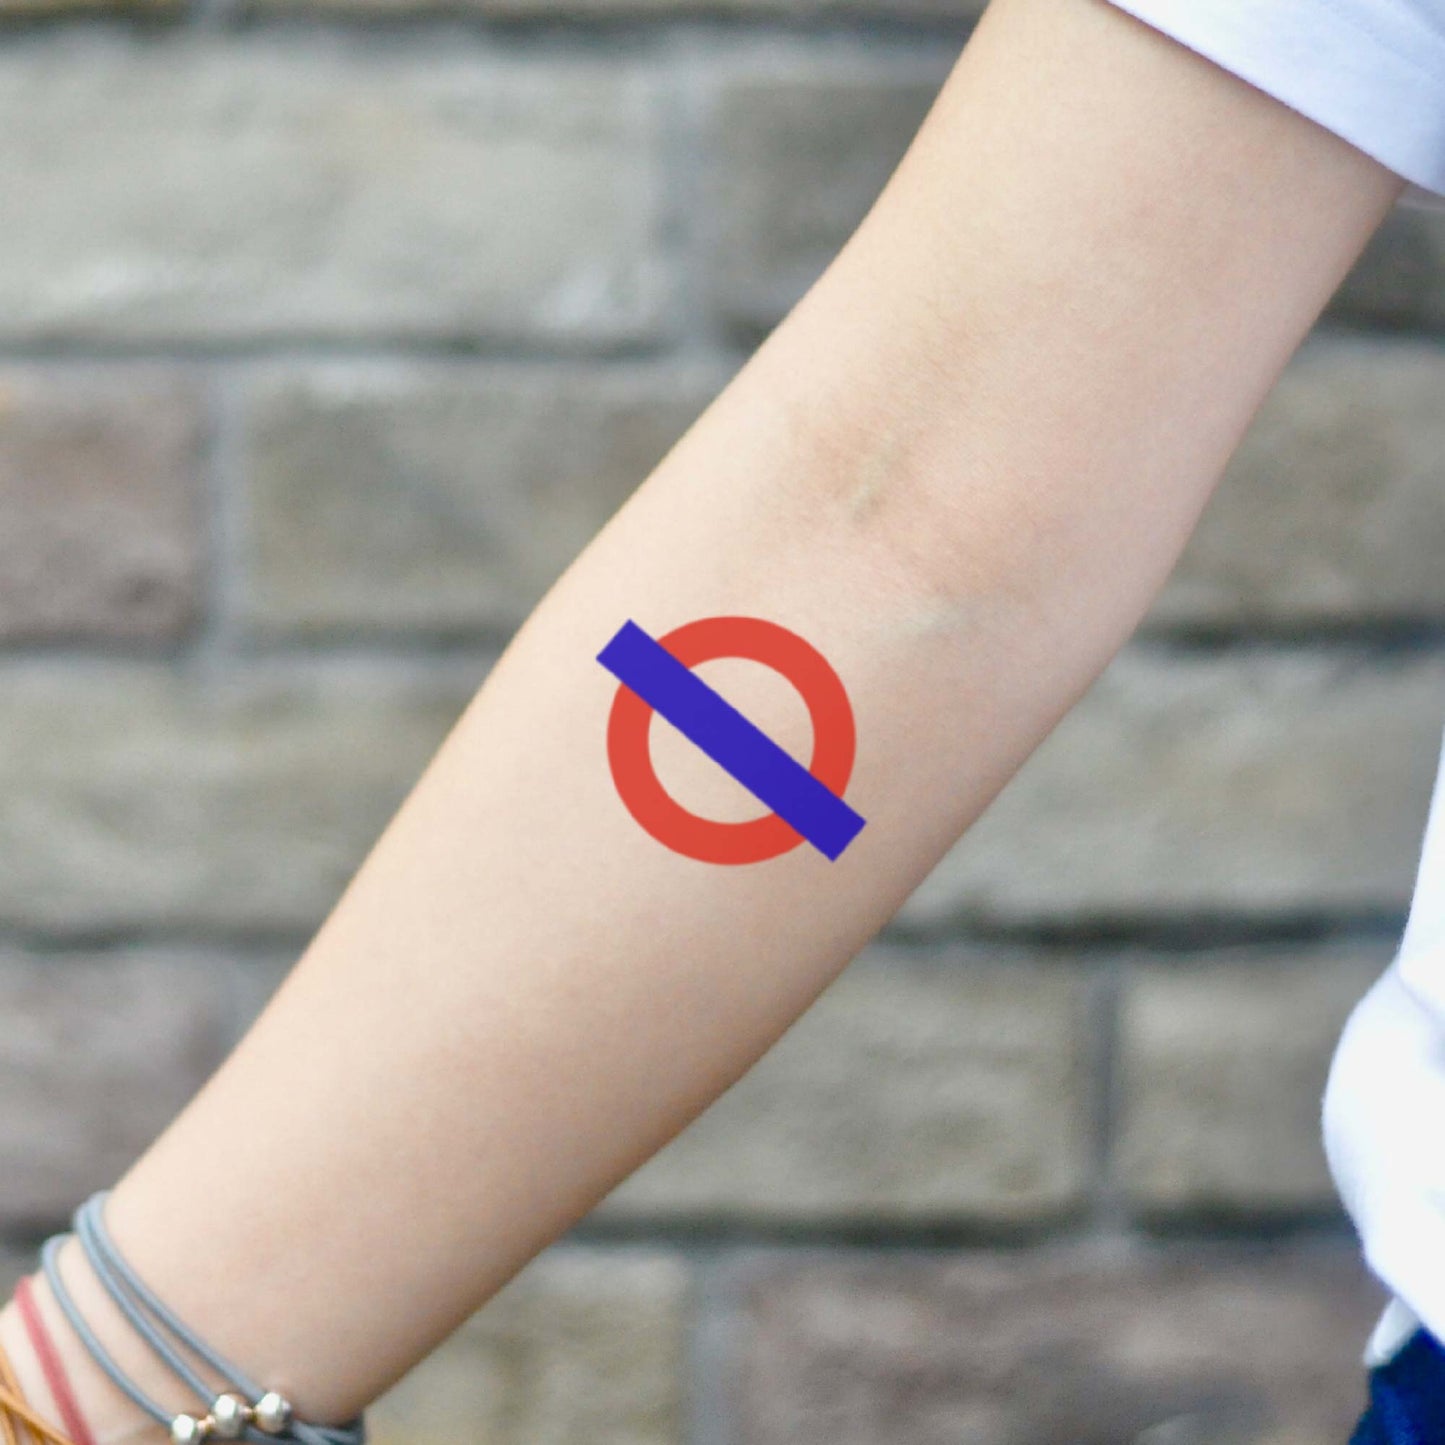 fake small underground train station exit simple sign color blue red temporary tattoo sticker design idea on inner arm forearm